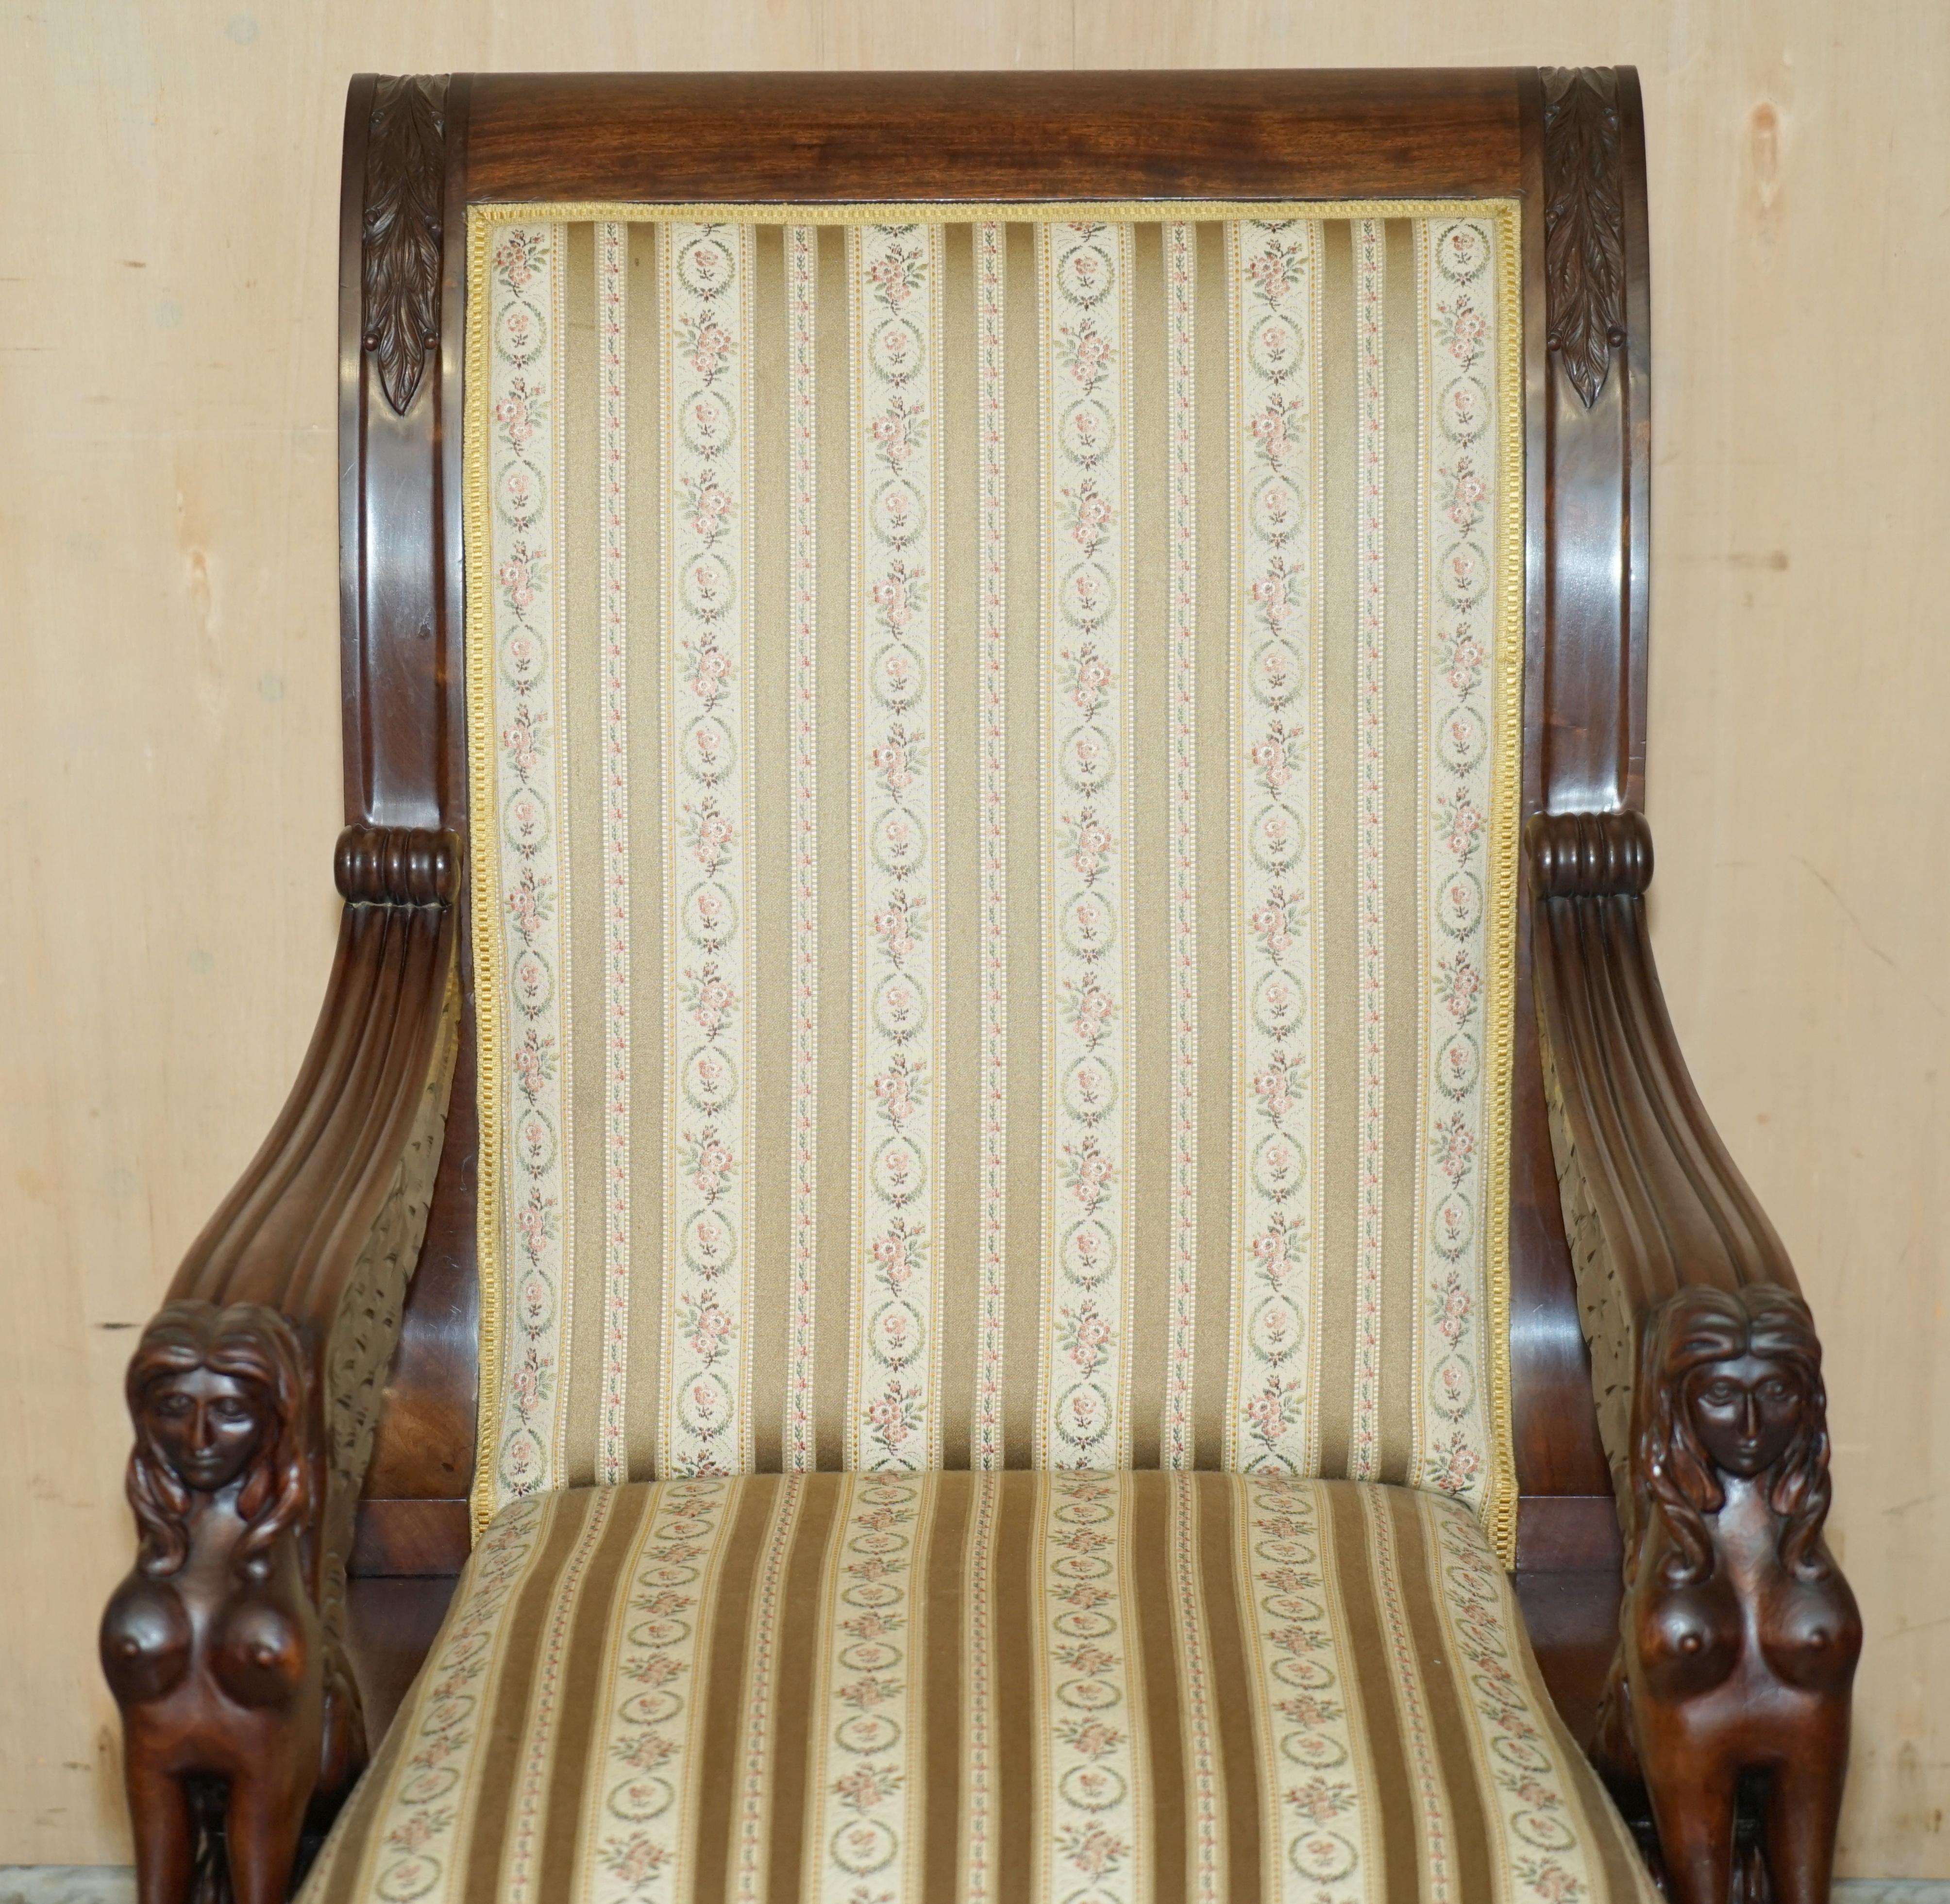 SIX FRENCH 1880 HARDWOOD HAND CARVED SPHINX ANTiQUE SALON DINING THRONE CHAIRS For Sale 7